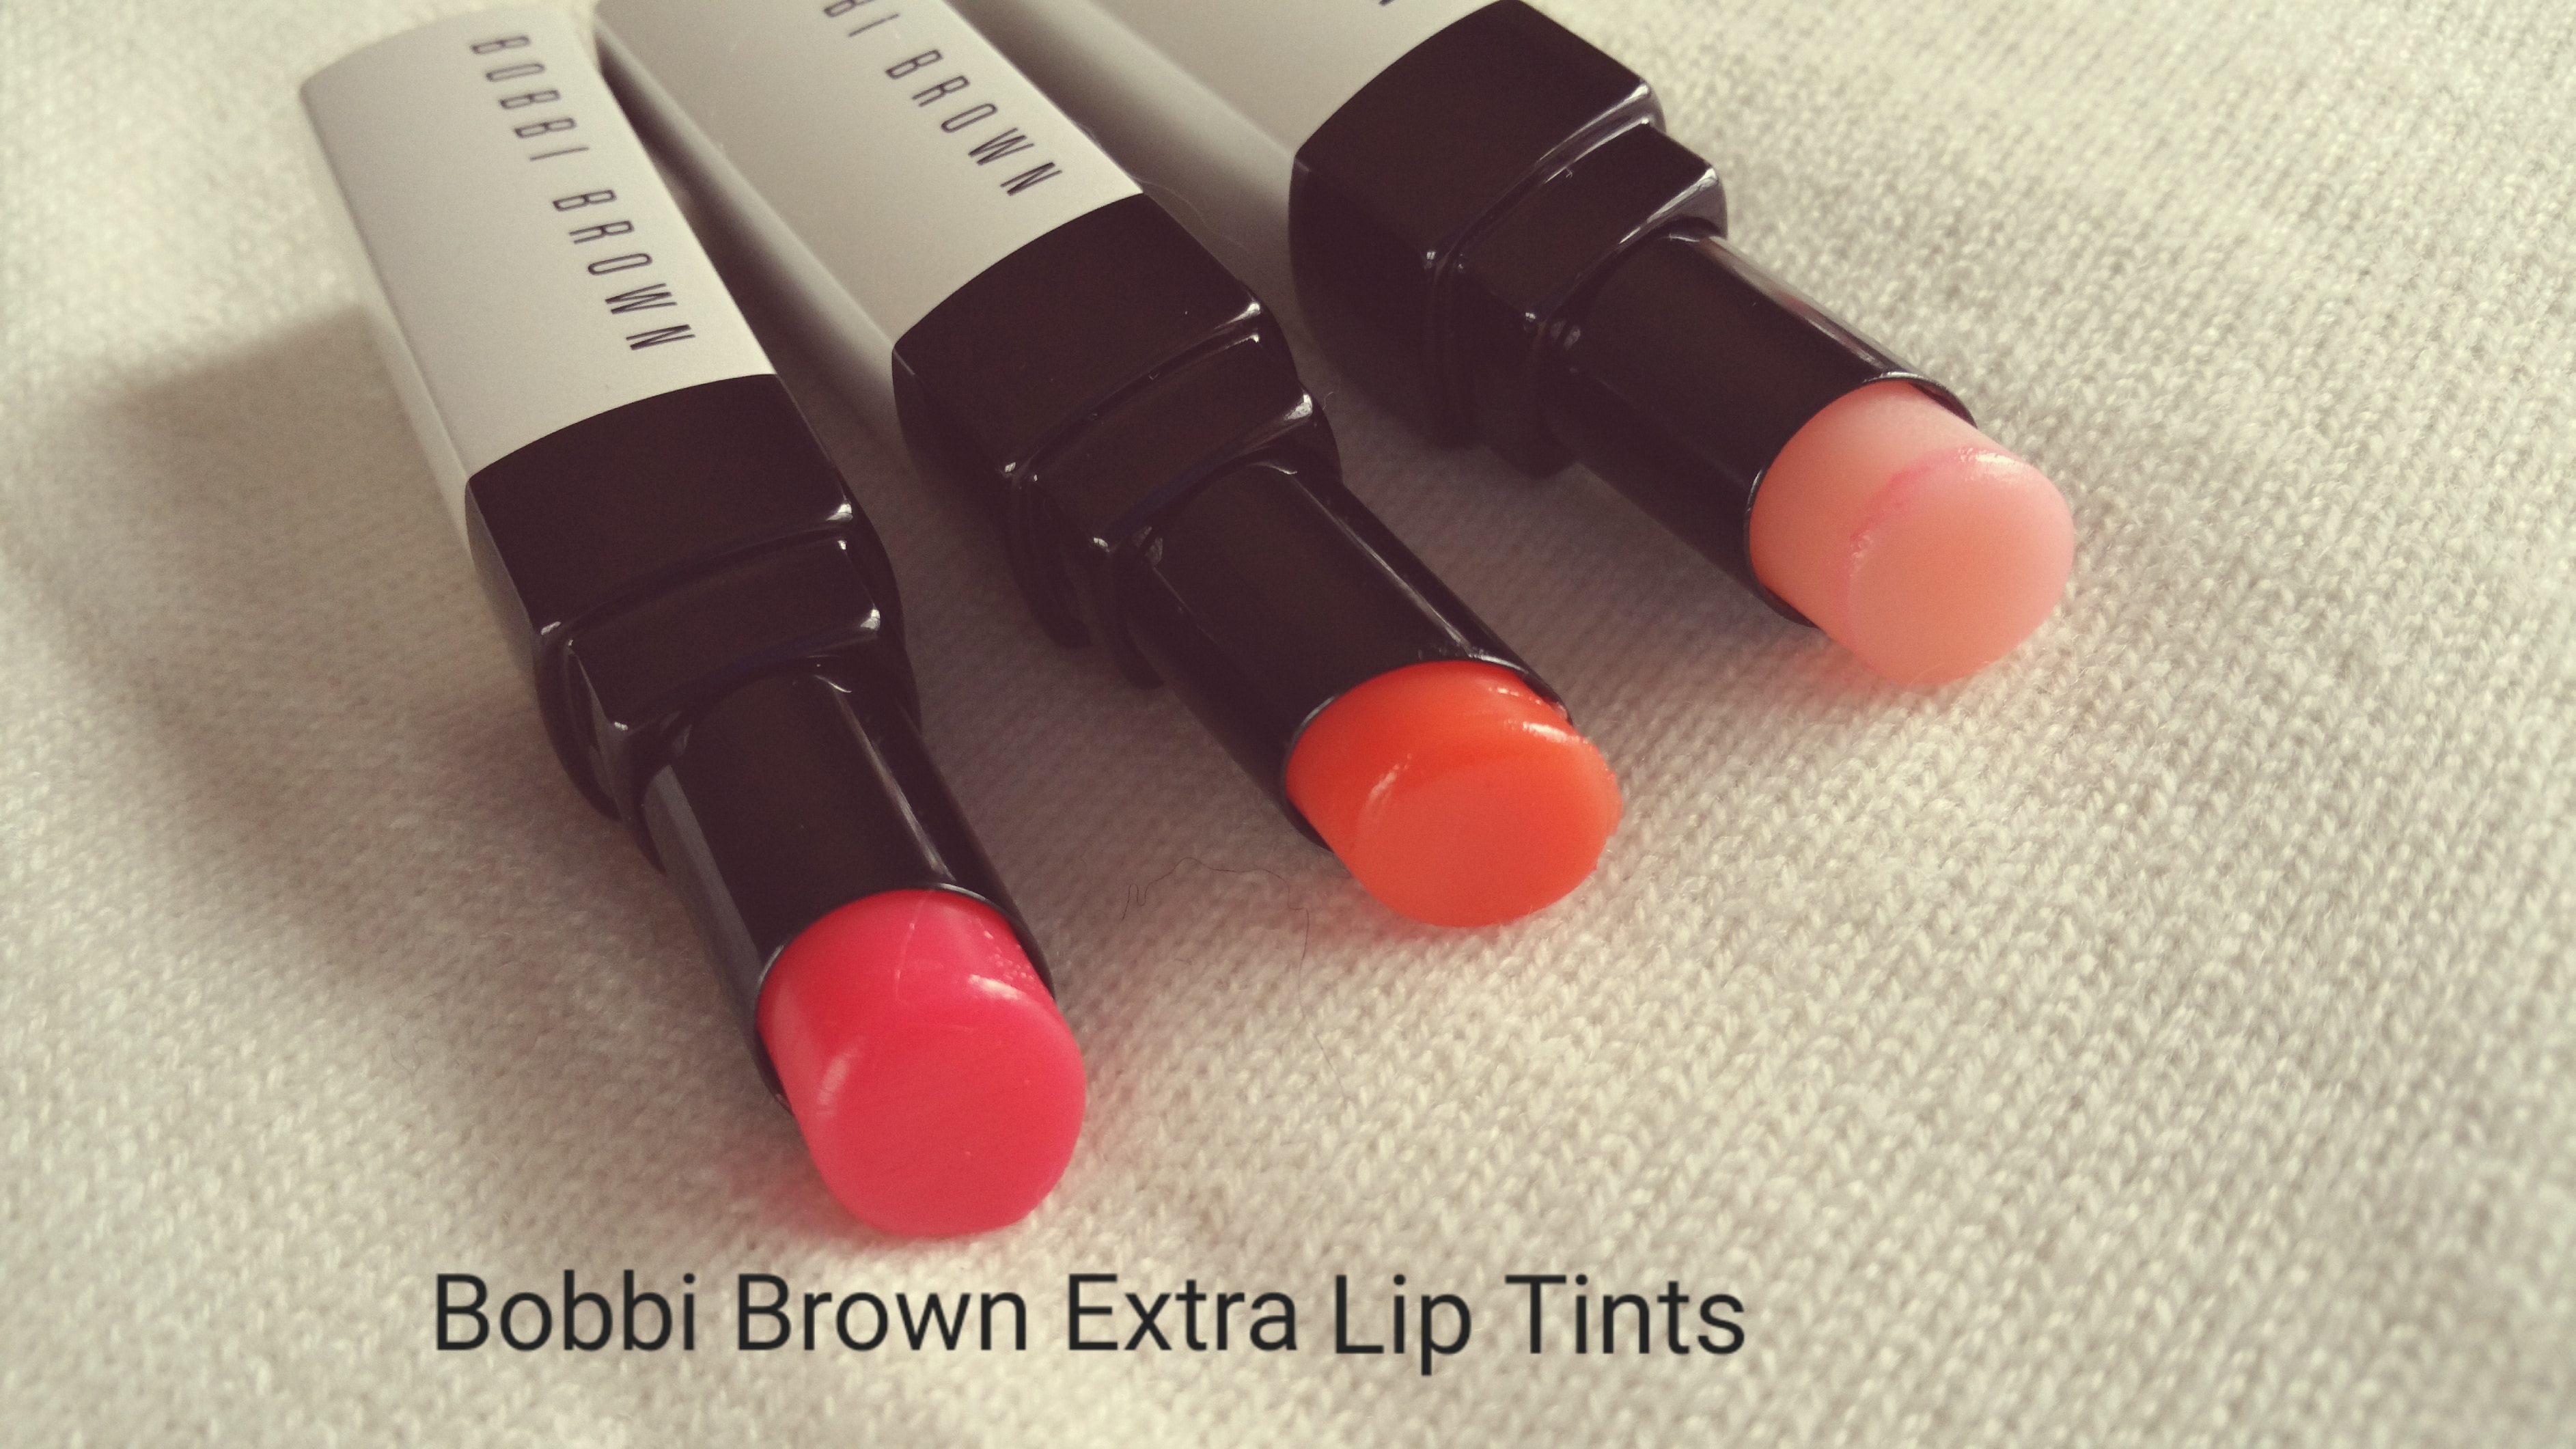 Bobbi Brown's Extra Lip Tint in 2 NEW shades! L to R: Bare Popsicle, Bare Melon, and Bare Pink.